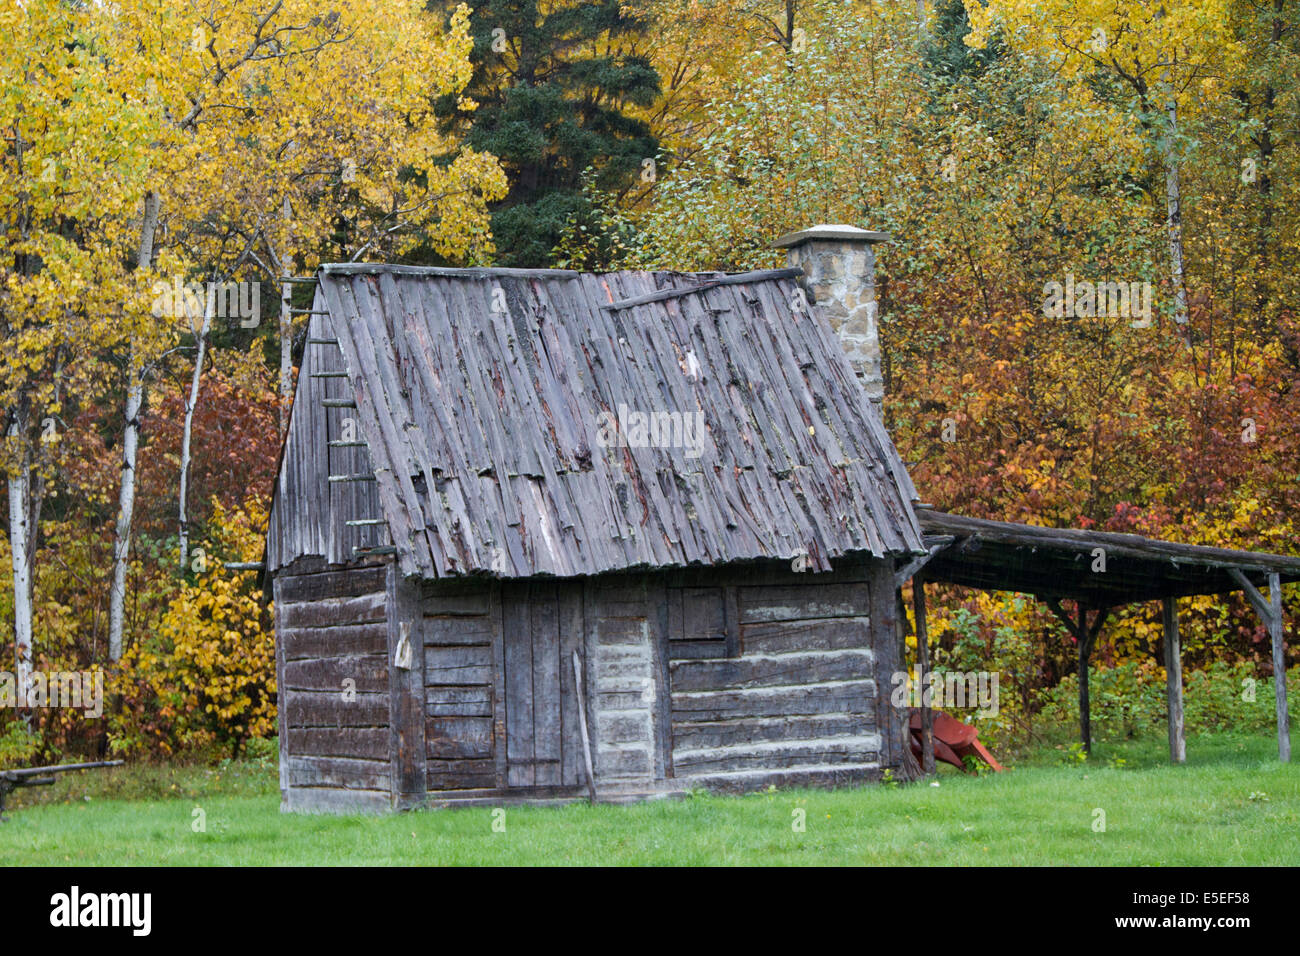 Cabin built in the style of the origianl settlers to eastern Canada then called New France.Sanguanay,Quebec, Canada Stock Photo